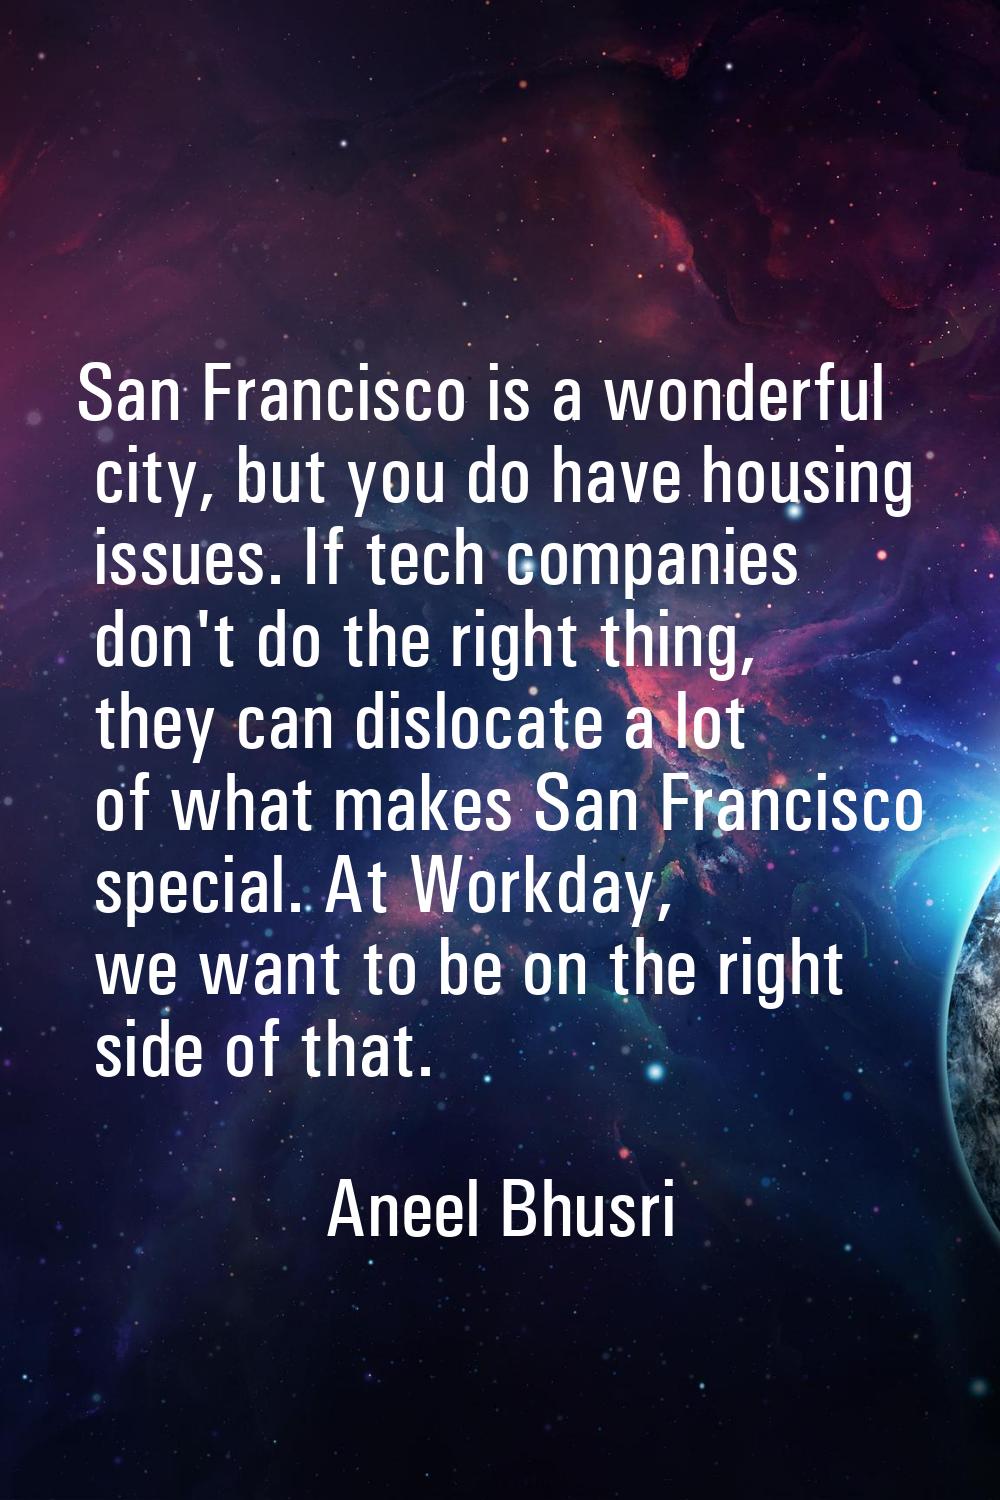 San Francisco is a wonderful city, but you do have housing issues. If tech companies don't do the r